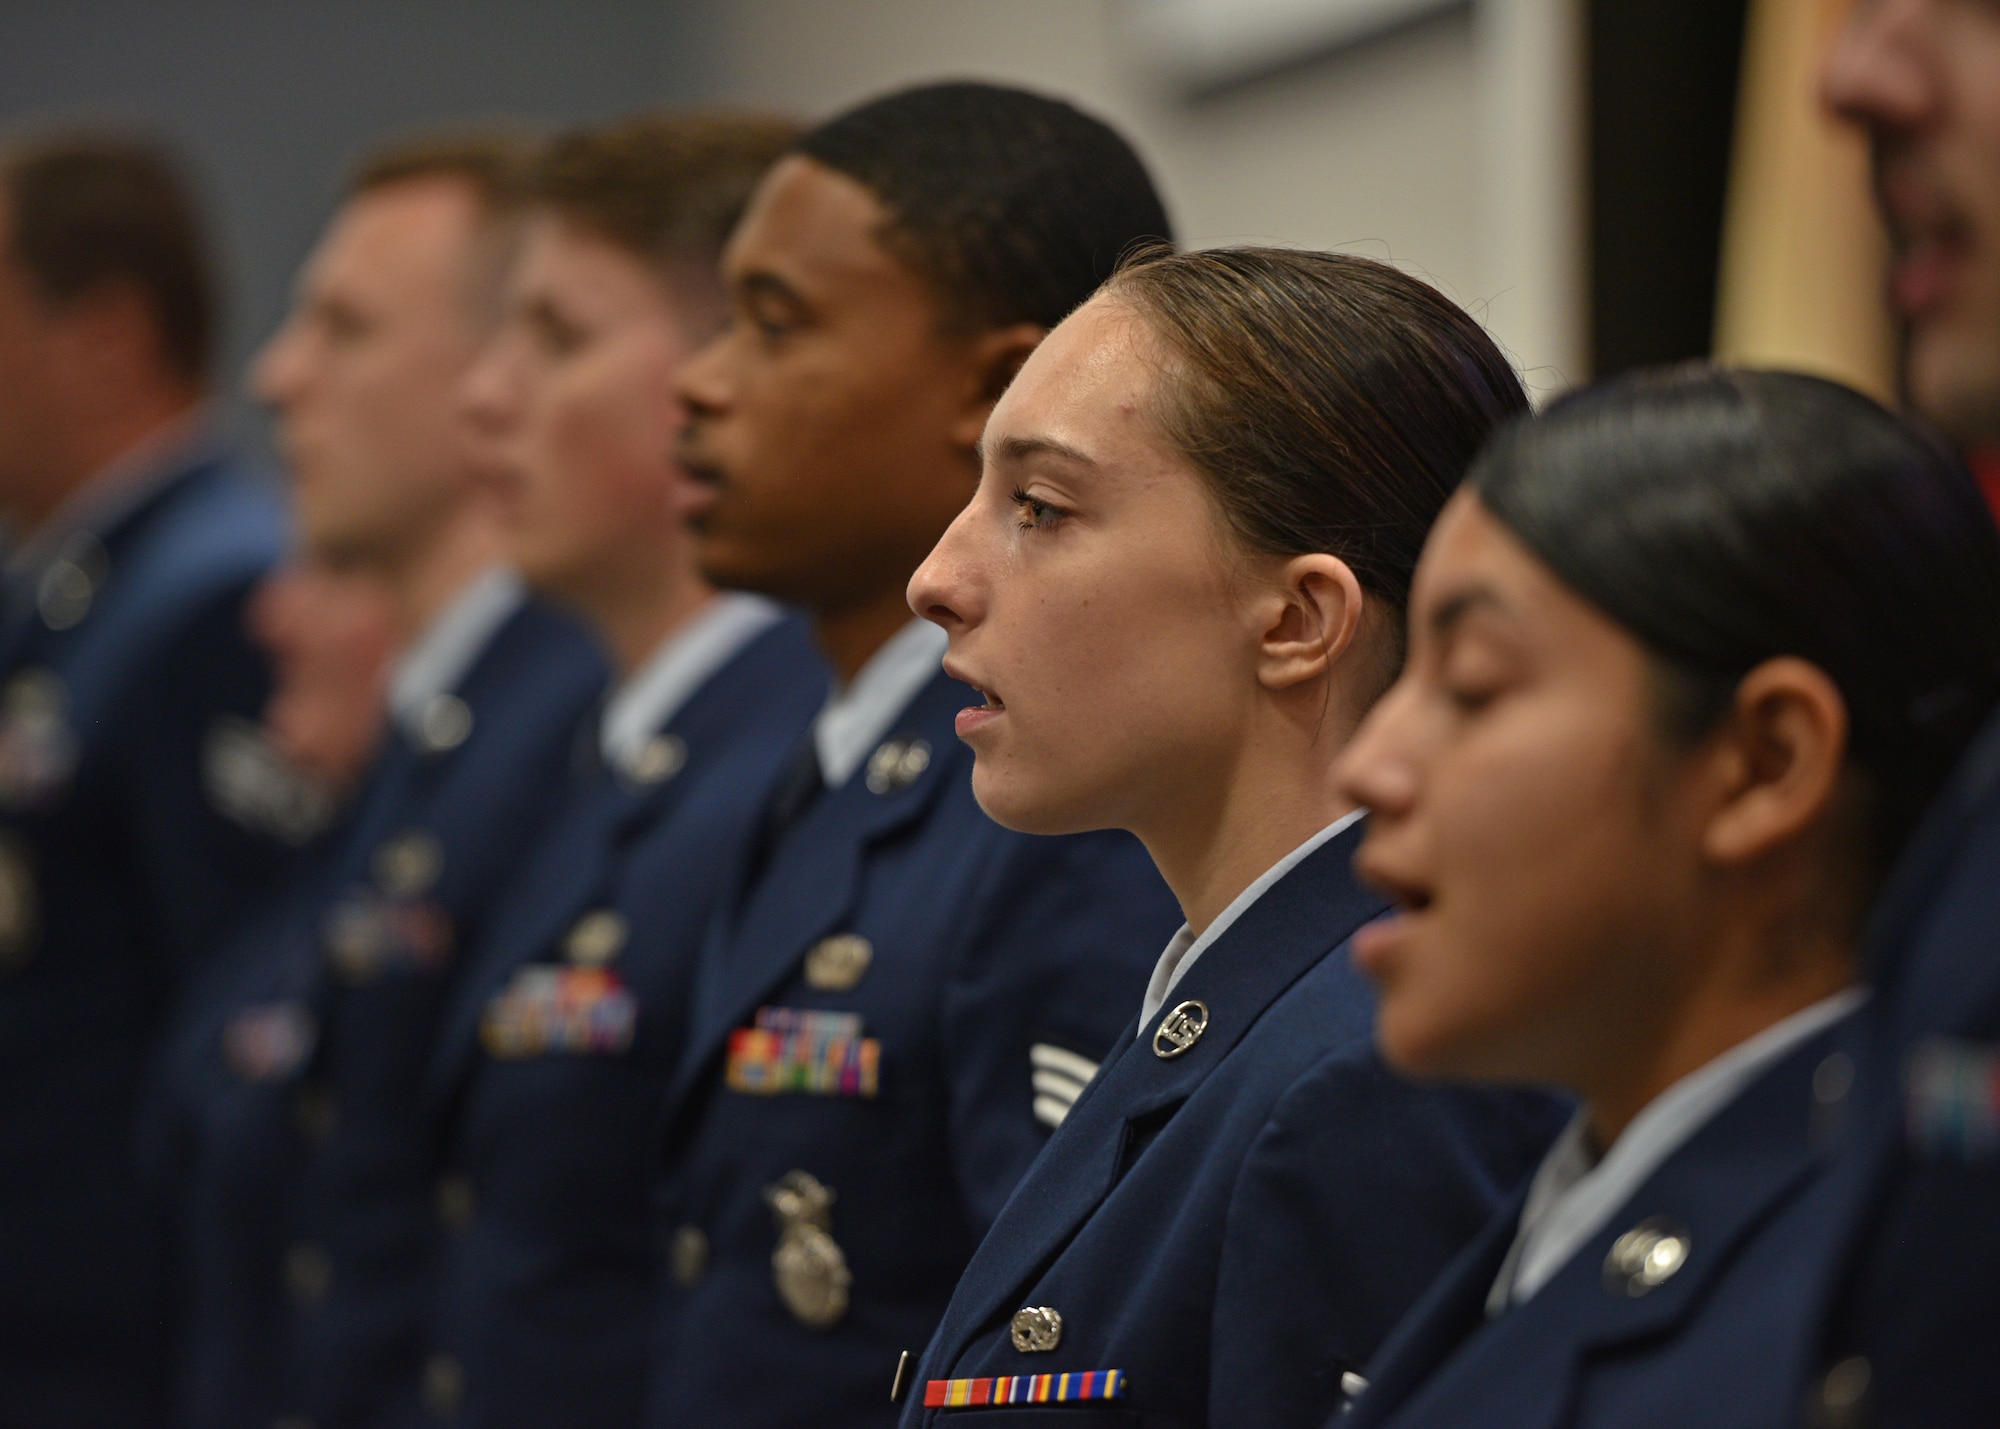 Airman Leadership School Class 22-E sings the Air Force song during the Airman Leadership School graduation at the Powell Event Center, Goodfellow Air Force Base, Texas, July 7, 2022. ALS is a five-week course designed to prepare senior airmen to assume supervisory duties through instruction in leadership, followership, written and oral communication skills, and the profession of arms. (U.S. Air Force photo by Senior Airman Ashley Thrash)